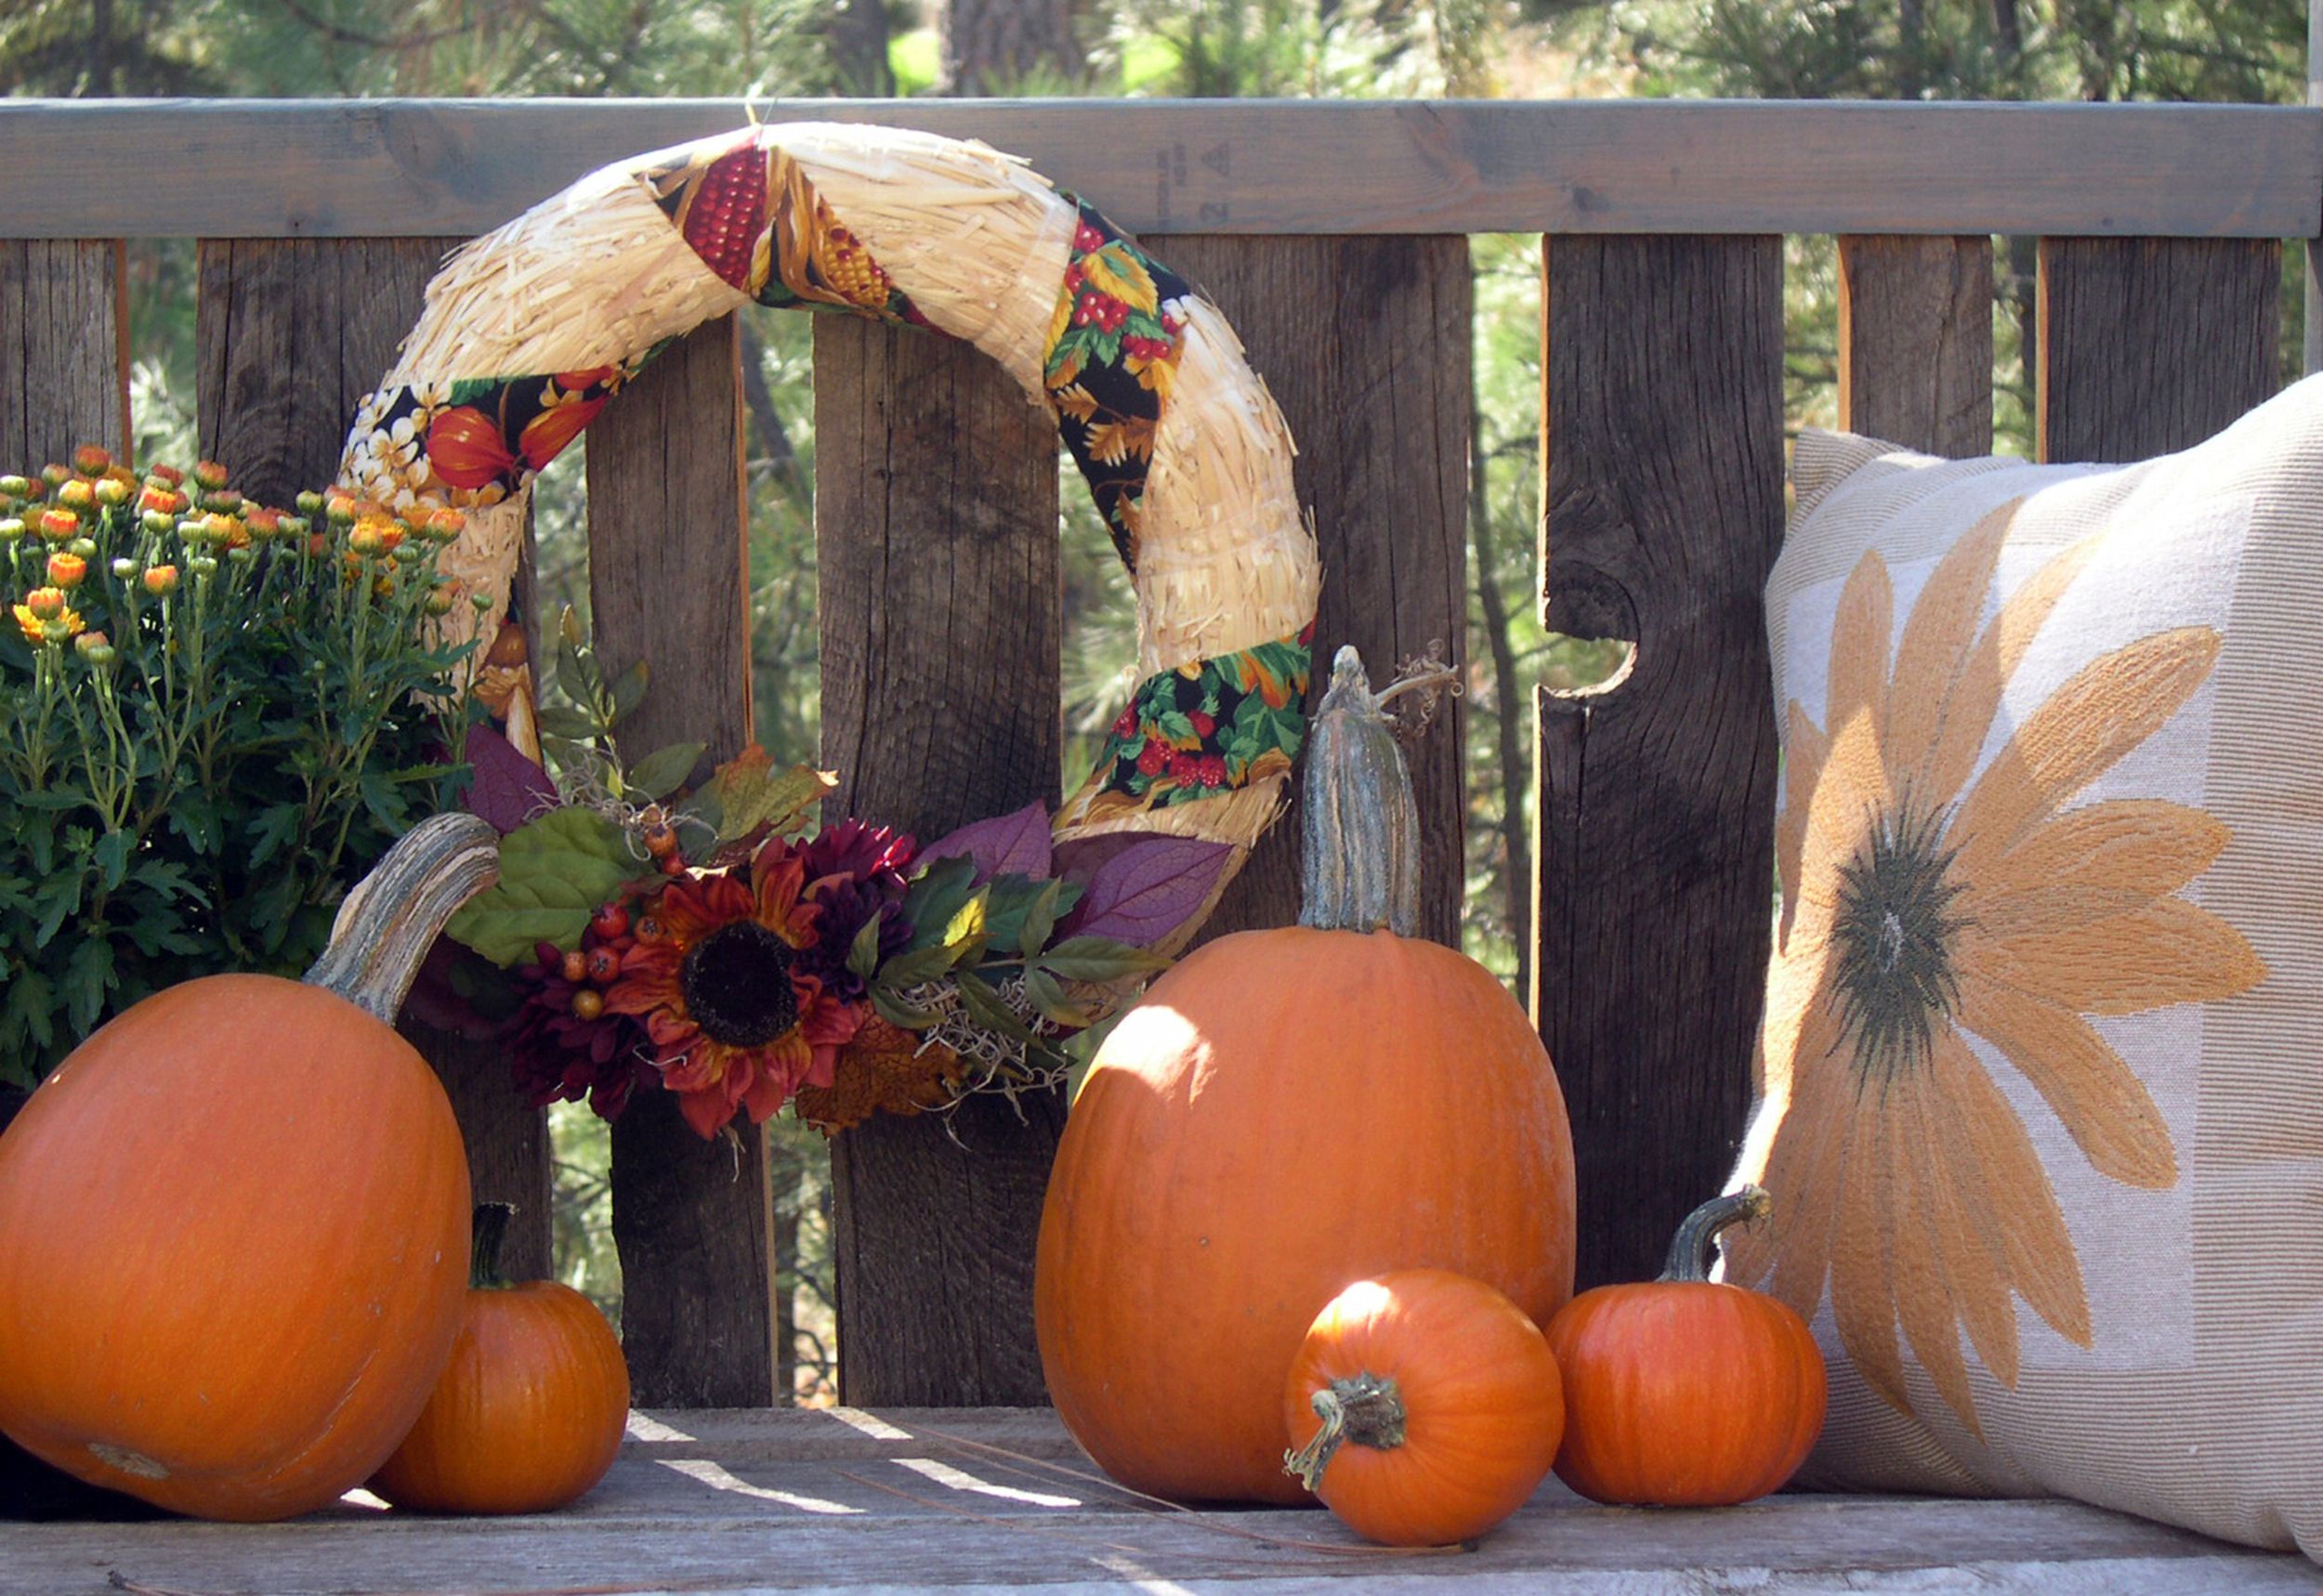 Details about   FALL AUTUMN Window Clings HORN OF PLENTY w/ GOURDS LEAVES PUMPKINS 